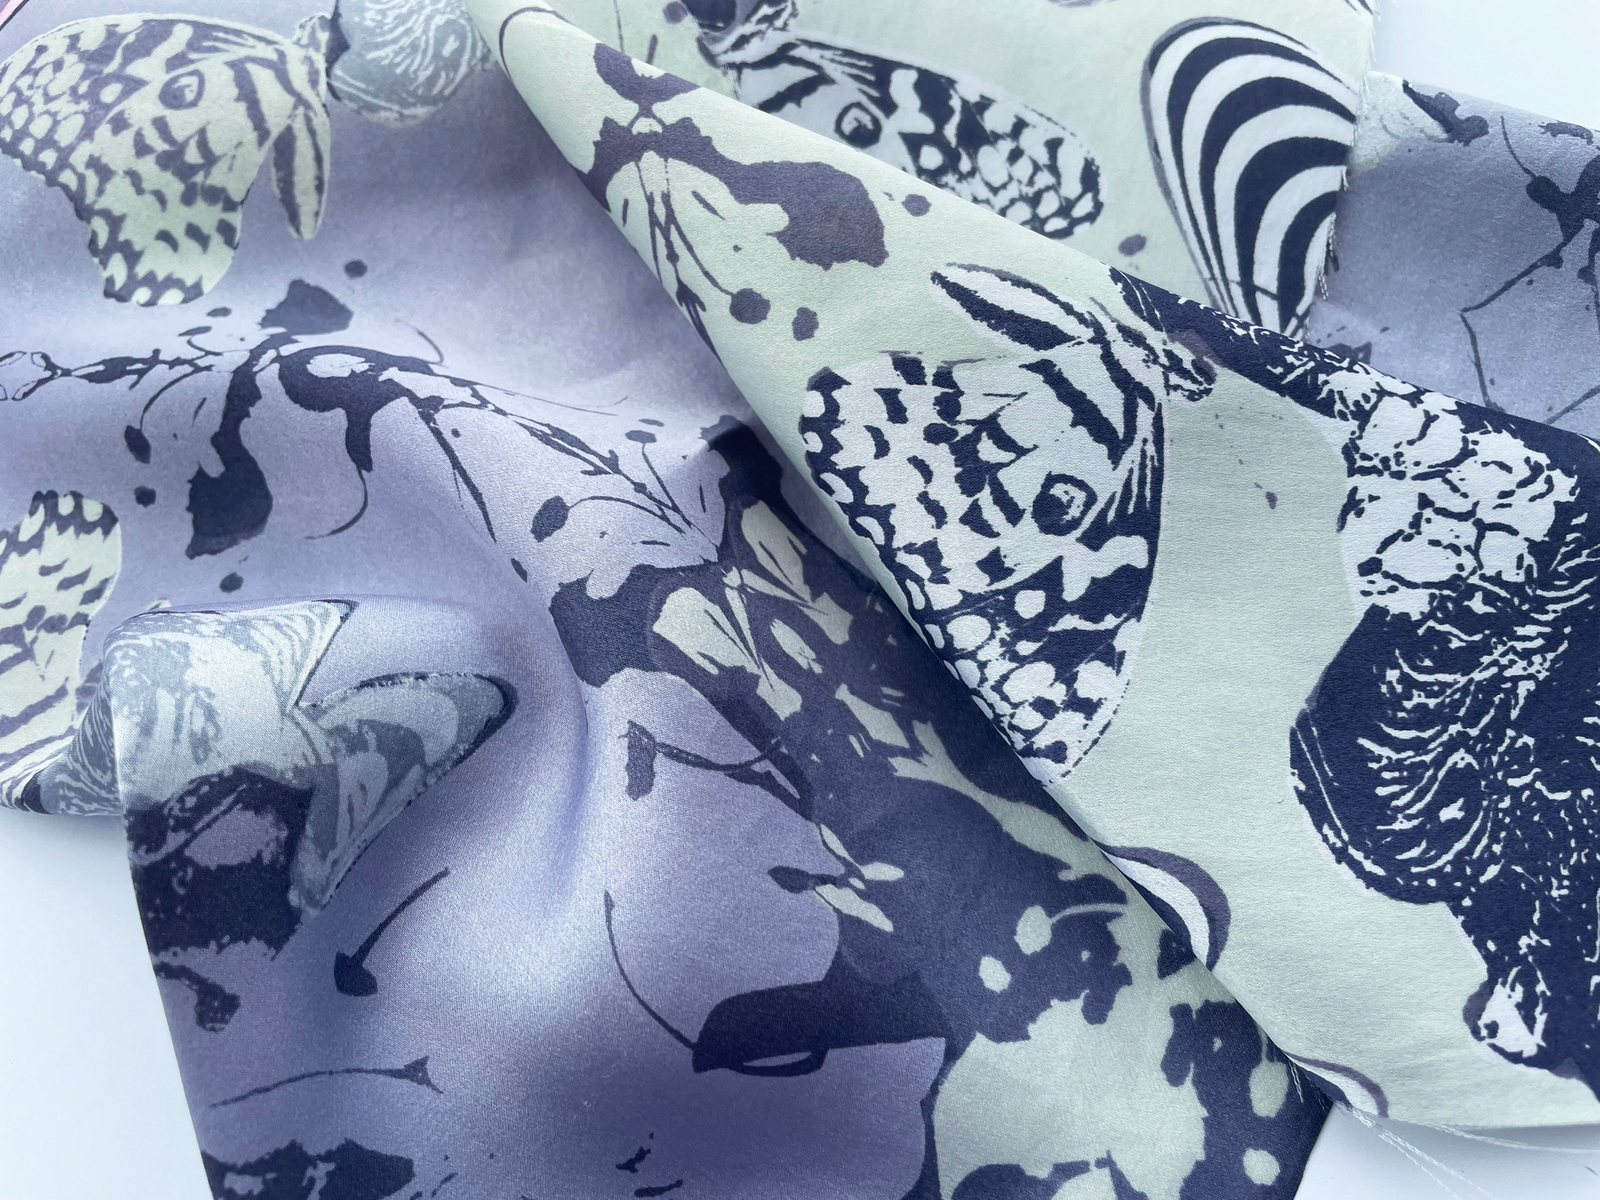 Bacterial dyes mixed with plant based dyes, screen printed onto silk.